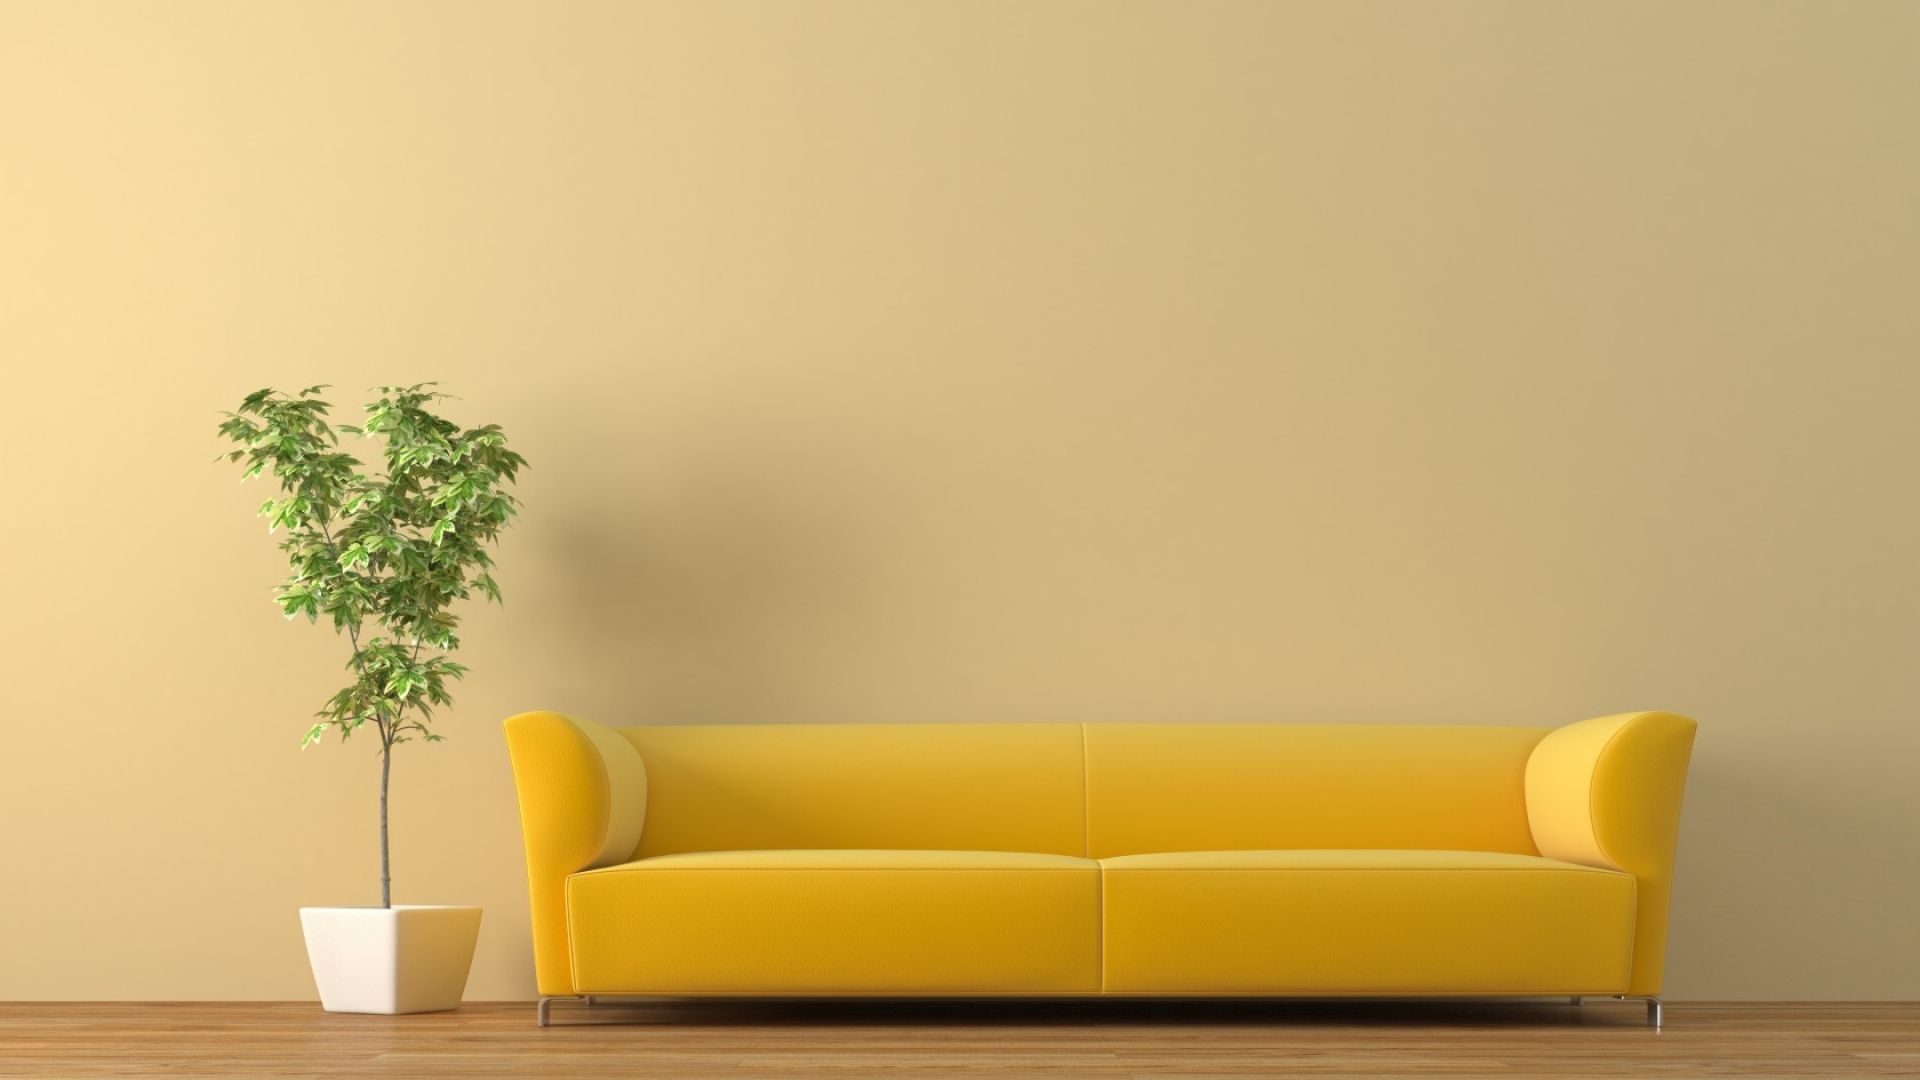 Wallpaper Sofa Tub Plant Background For Showing